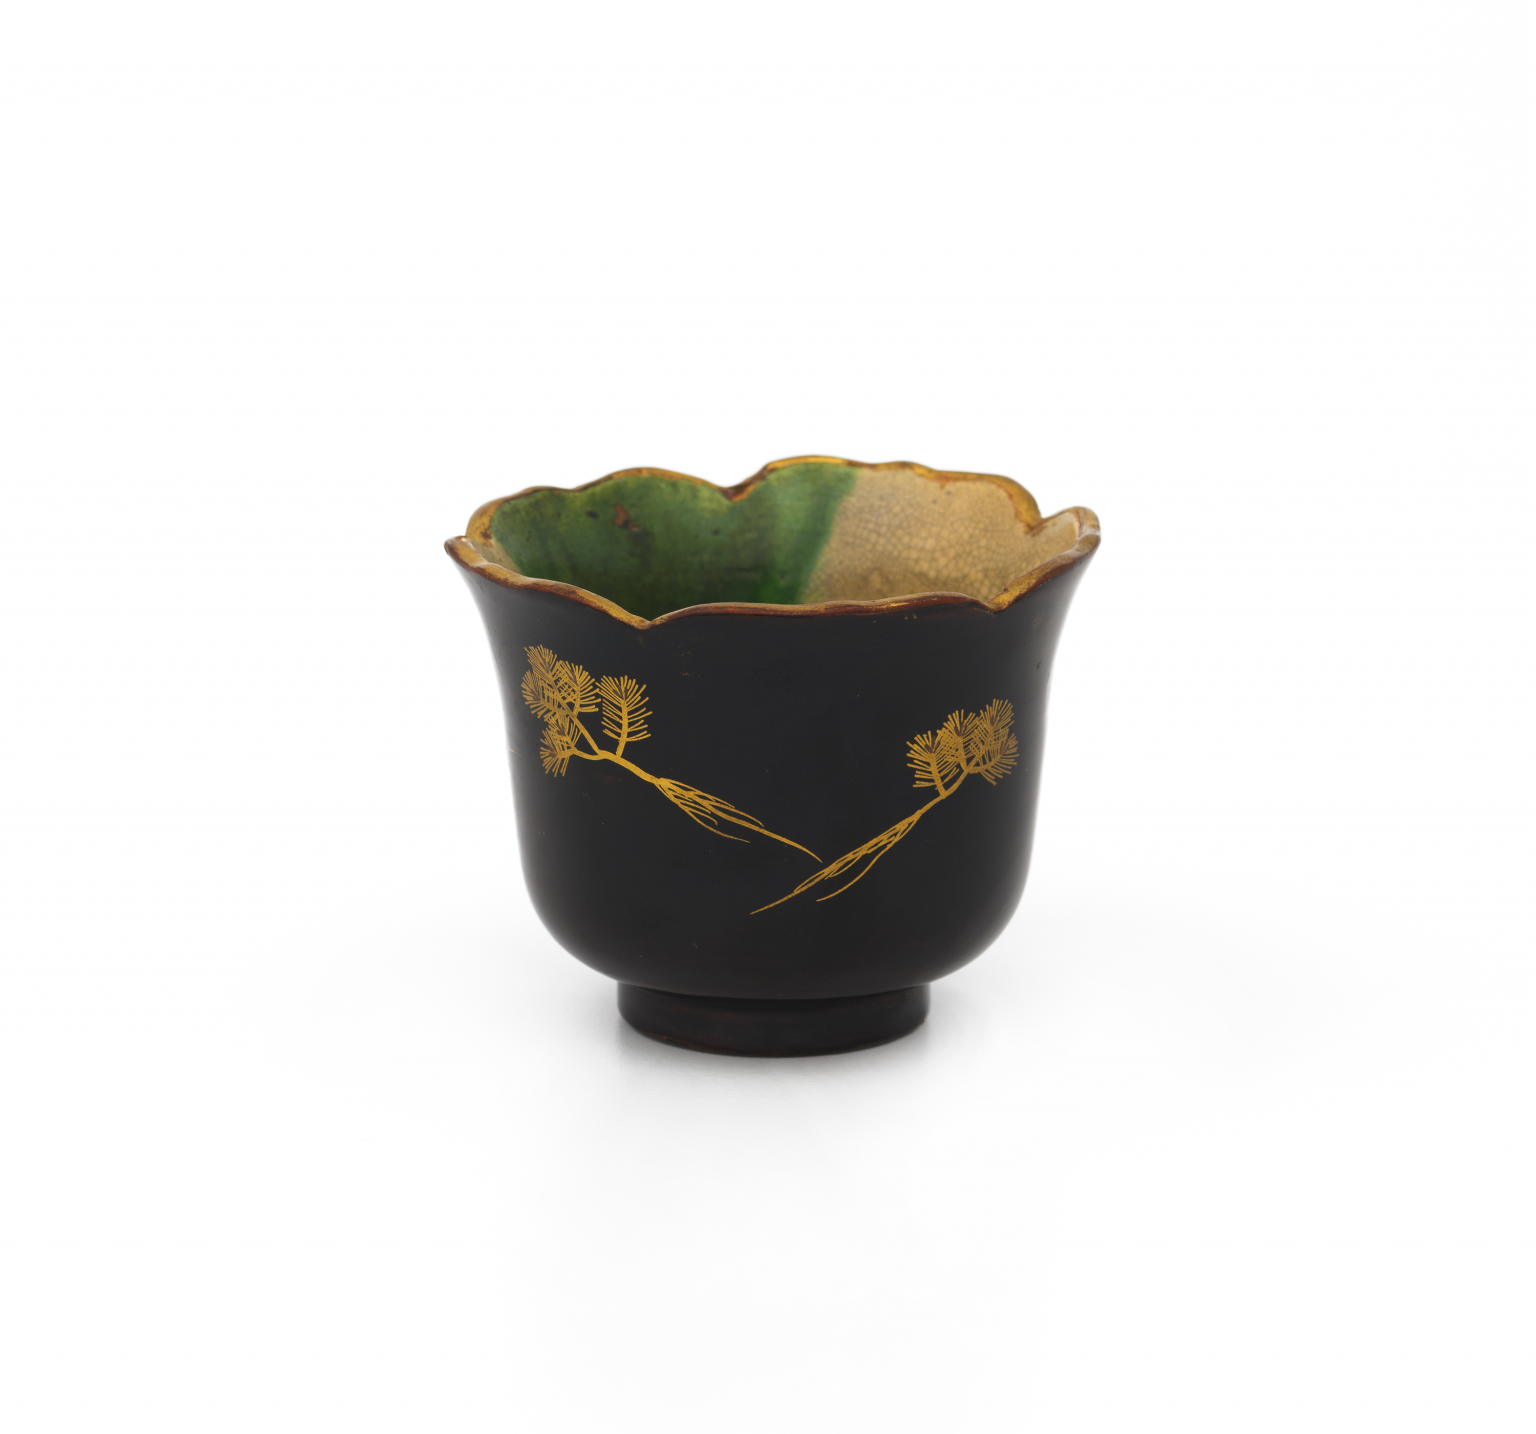 Japanese lacquered pottery bowl